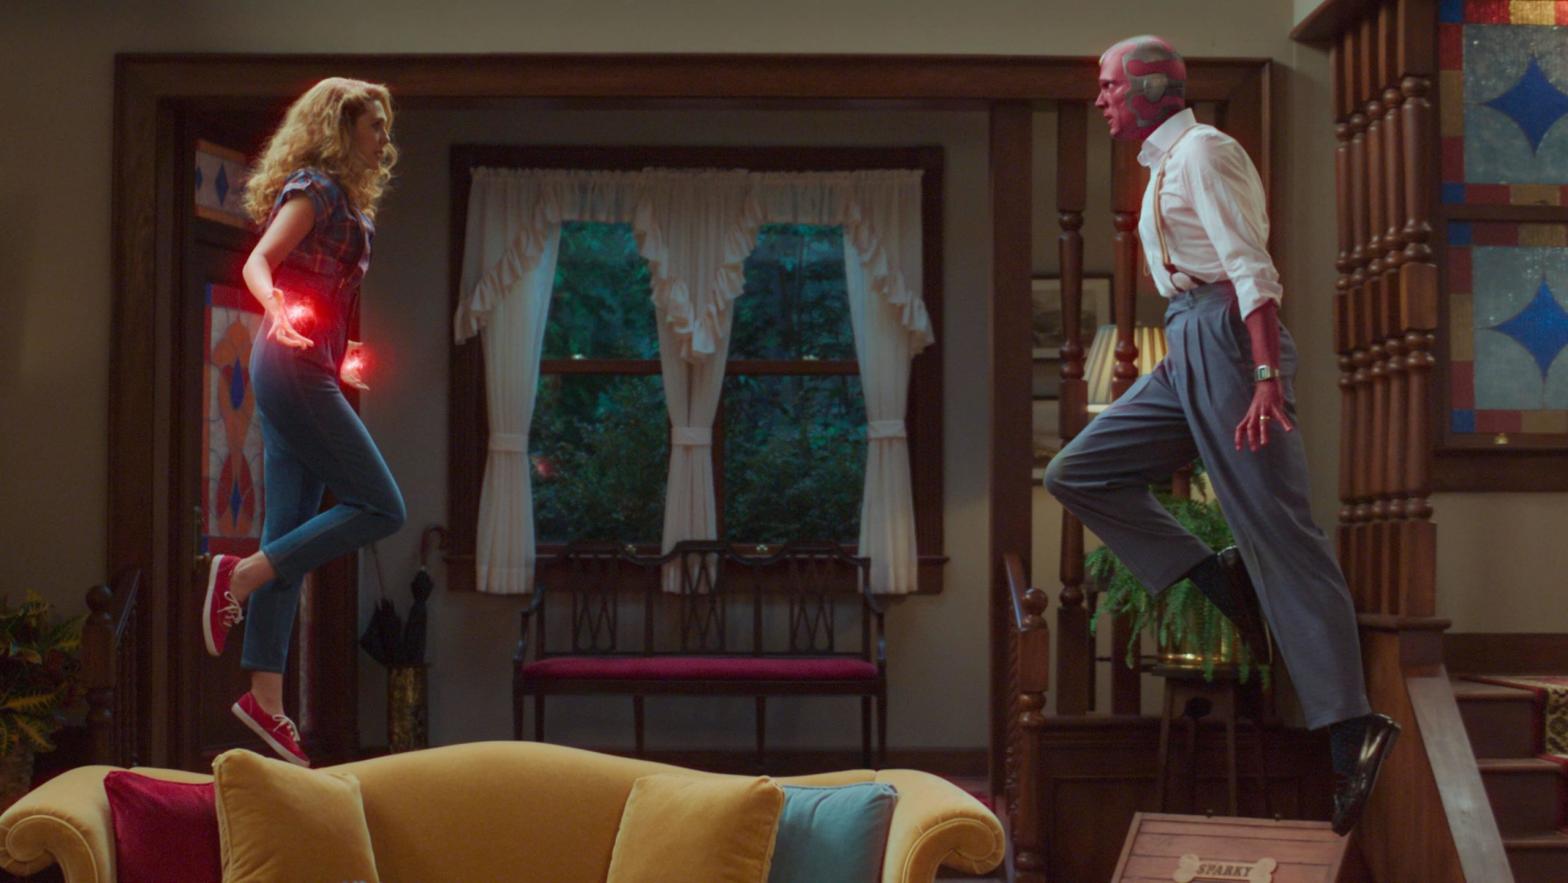 Wanda and Vision get into a heated argument just before an unexpected guest arrives to their Westview home. (Image: Marvel Studios)